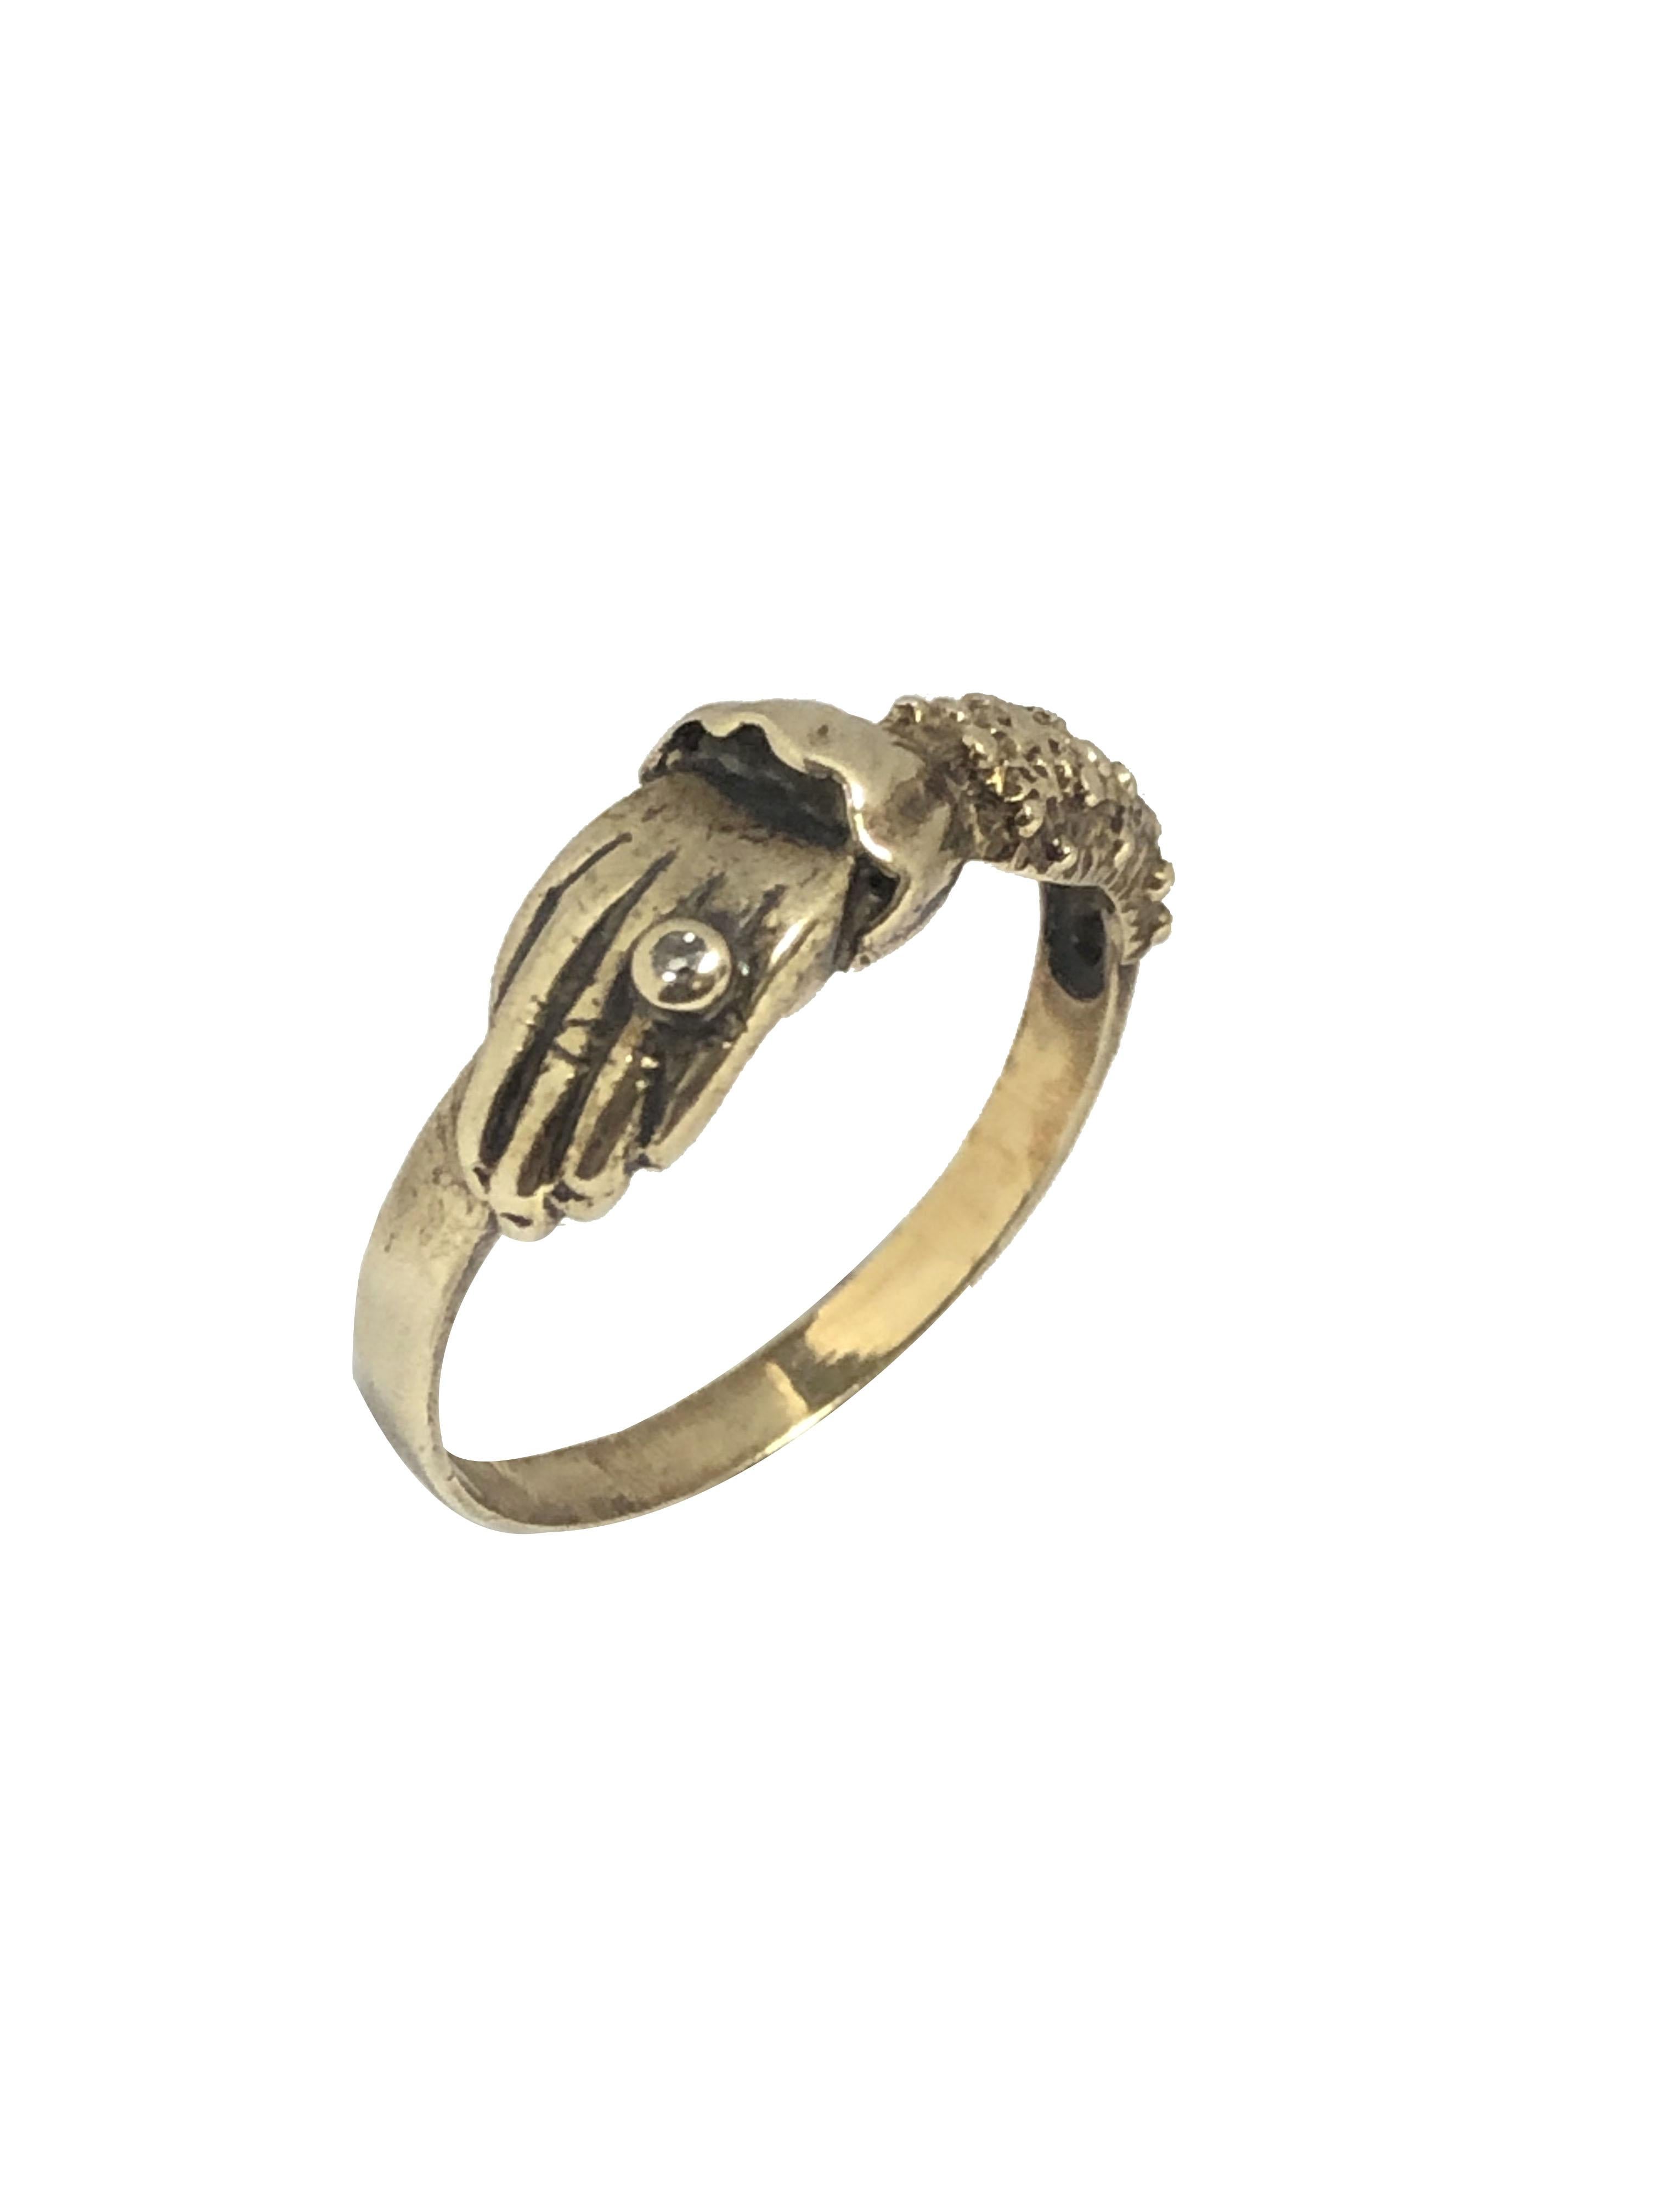 Circa 1880 - 1890 9K Yellow Gold English Hallmarked Hand Over heart Ring, the top measures 5/8 X 1/4 inch, very nicely detailed and having a diamond set ring on one of the fingers. Finger size 8. 